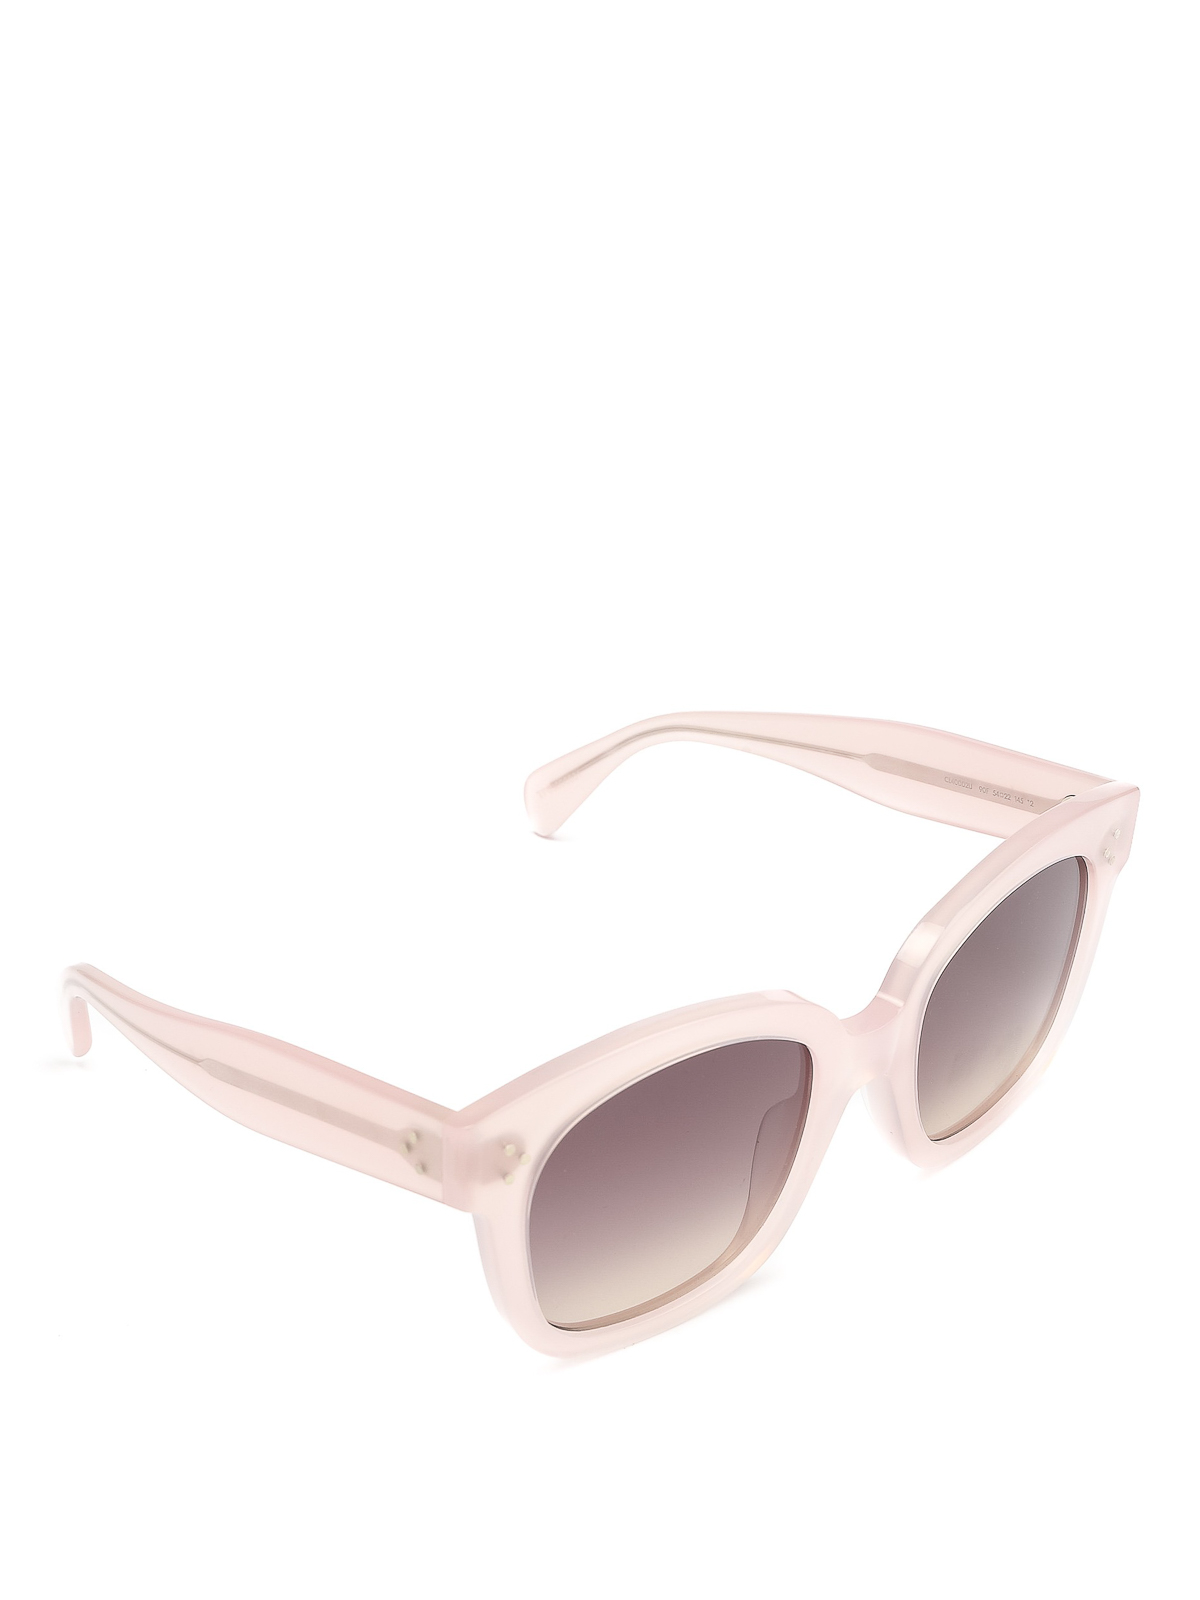 light pink frame sunglasses > Up to 69% OFF > Free shipping